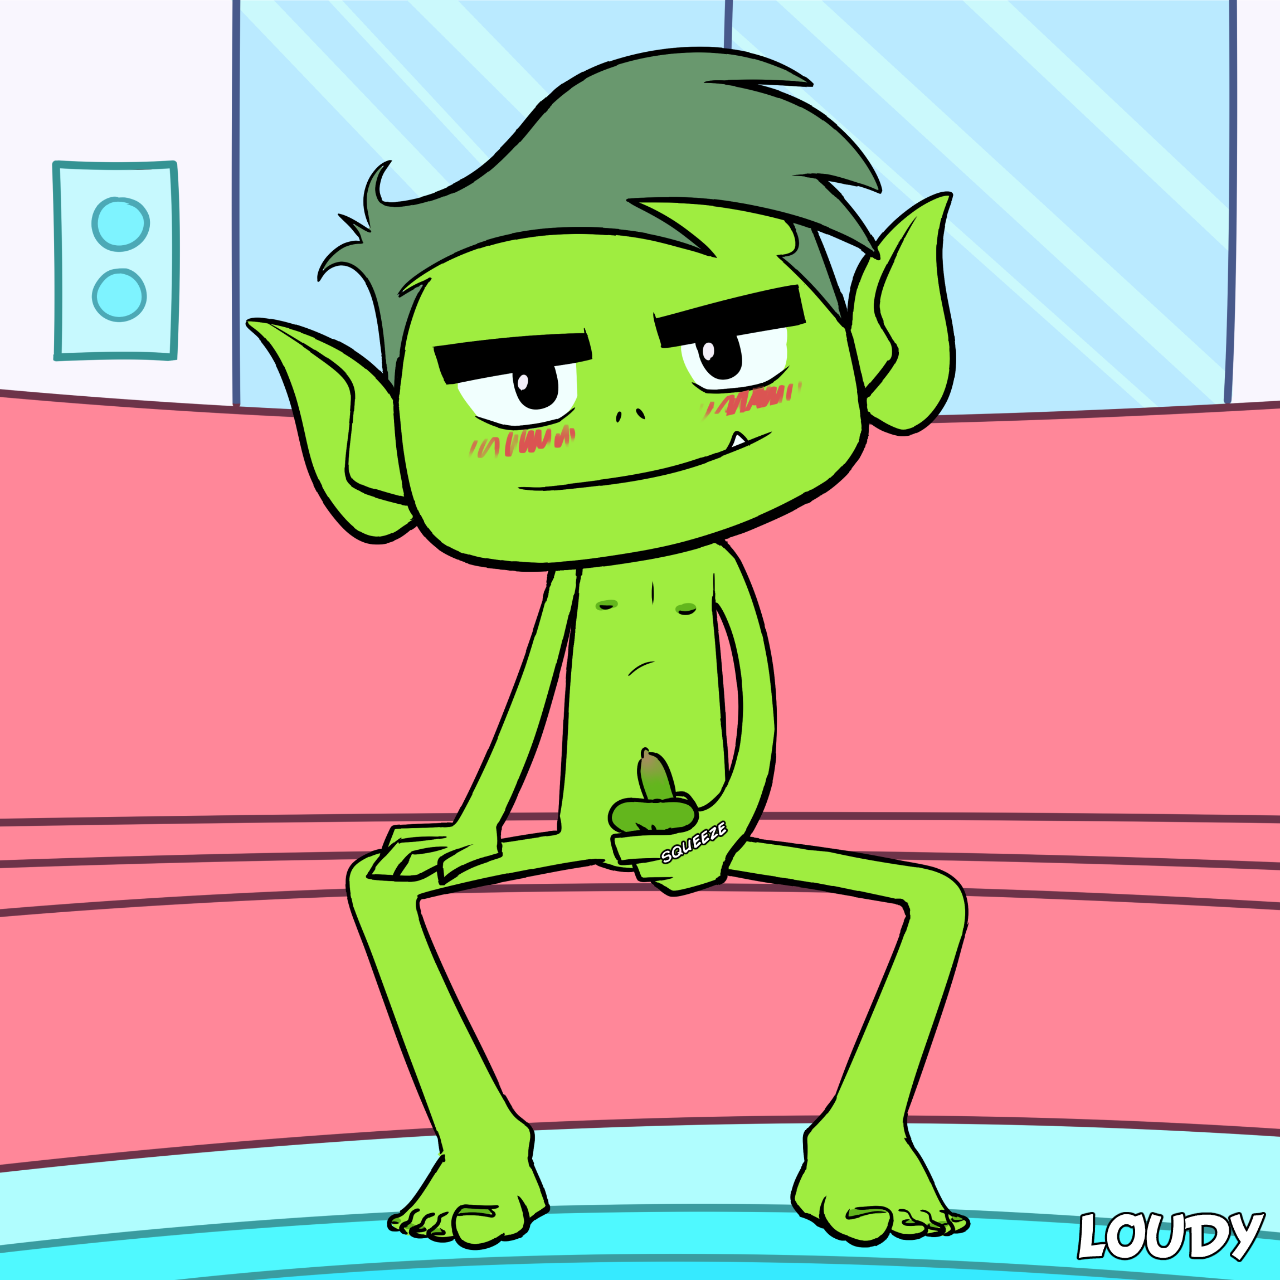 Young Justice Beast Boy Rule 34